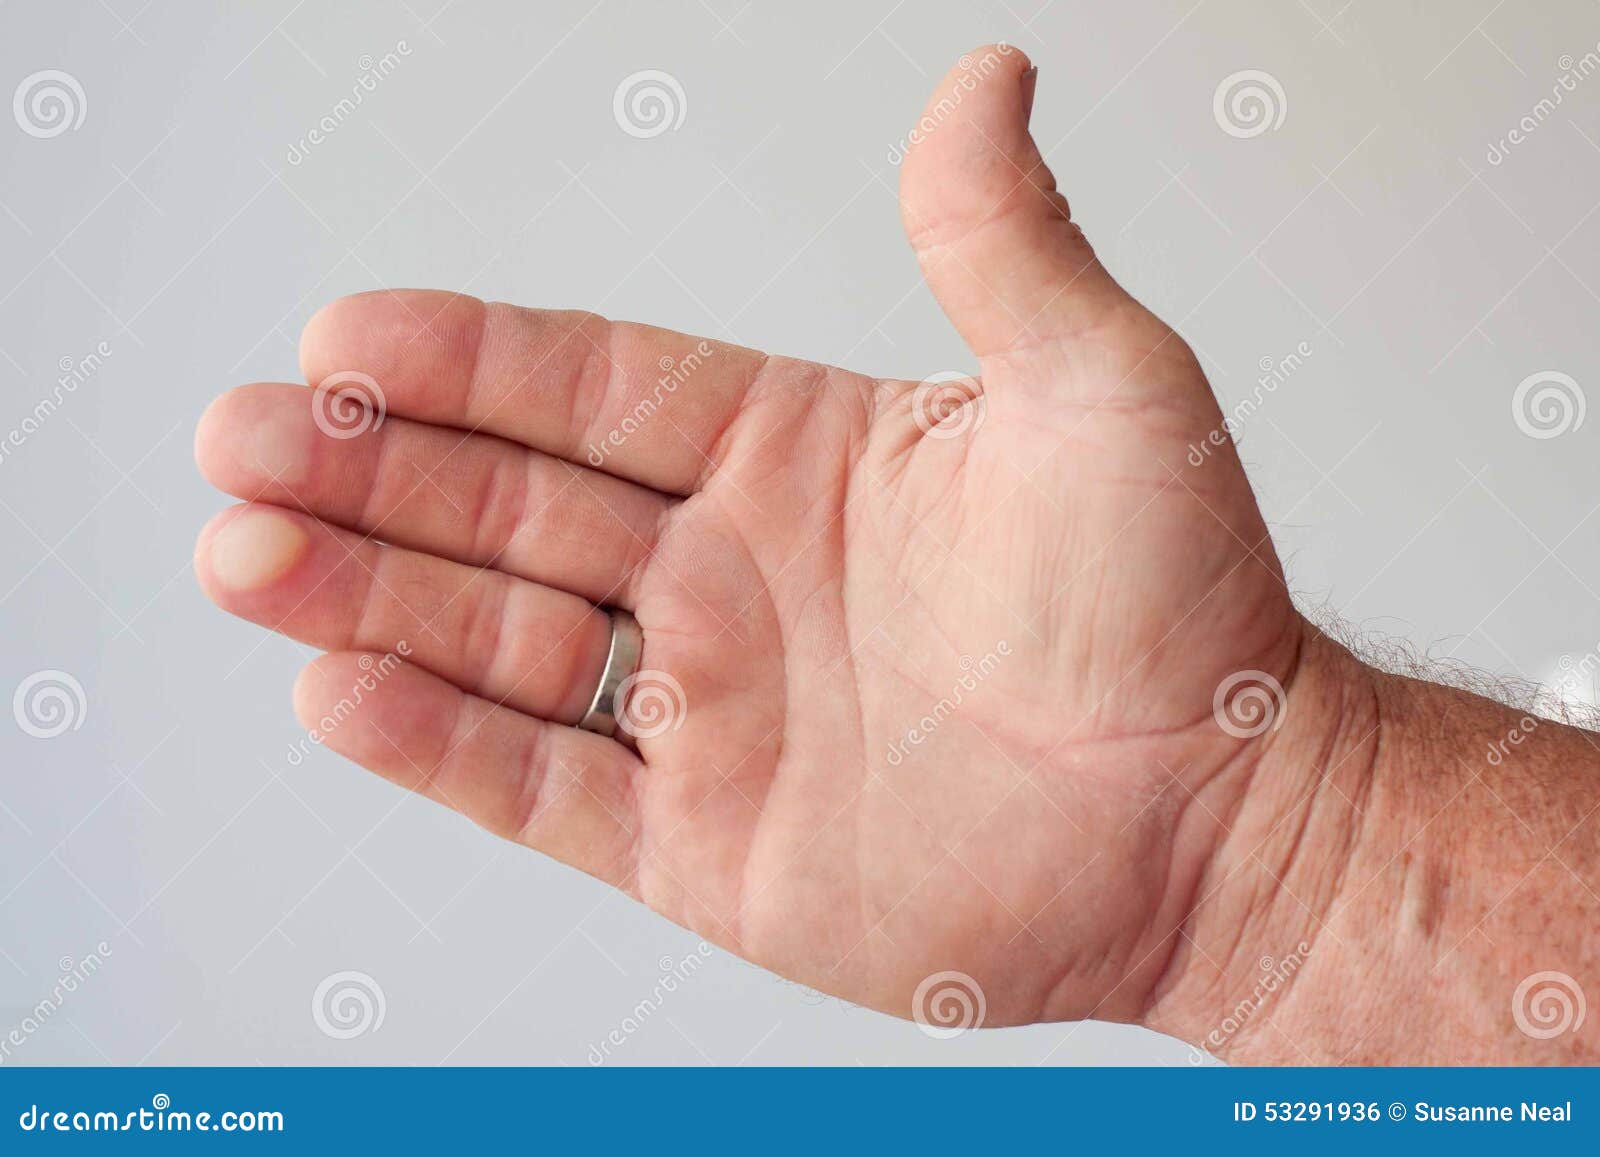 blisters on two fingers of a man's hand